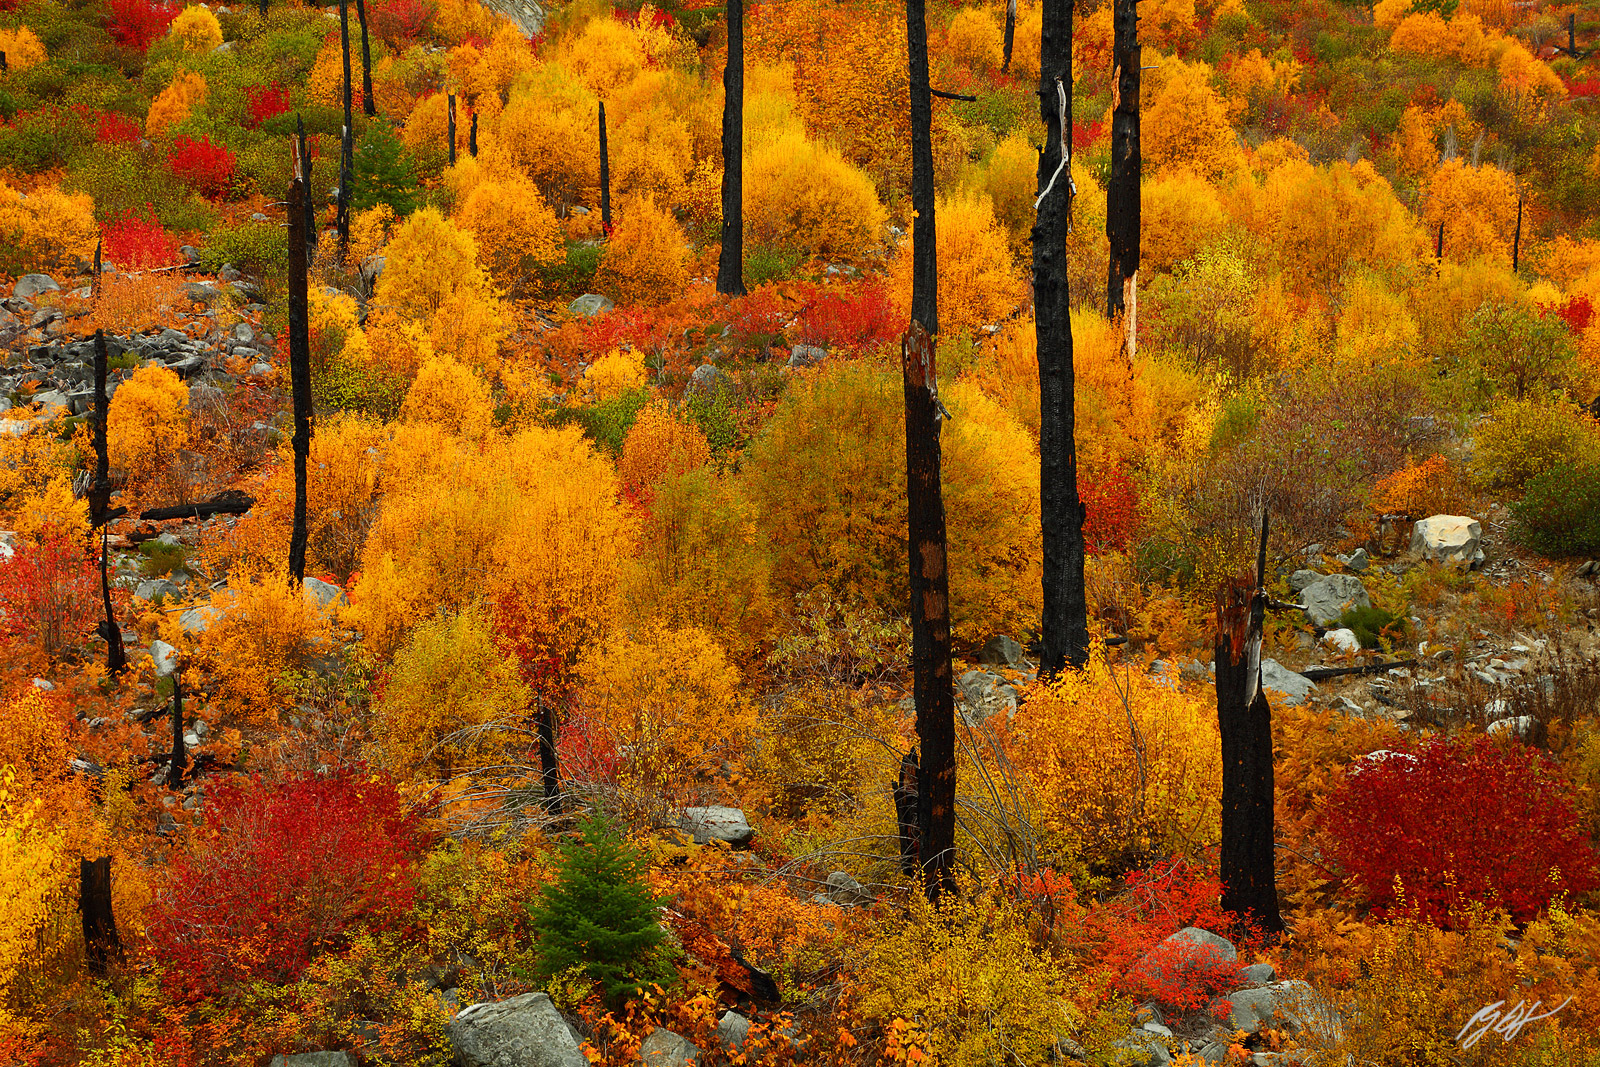 Fall Color and Burnt Snags in Tumwater Canyon in the Wenatchee National Forest in Washington